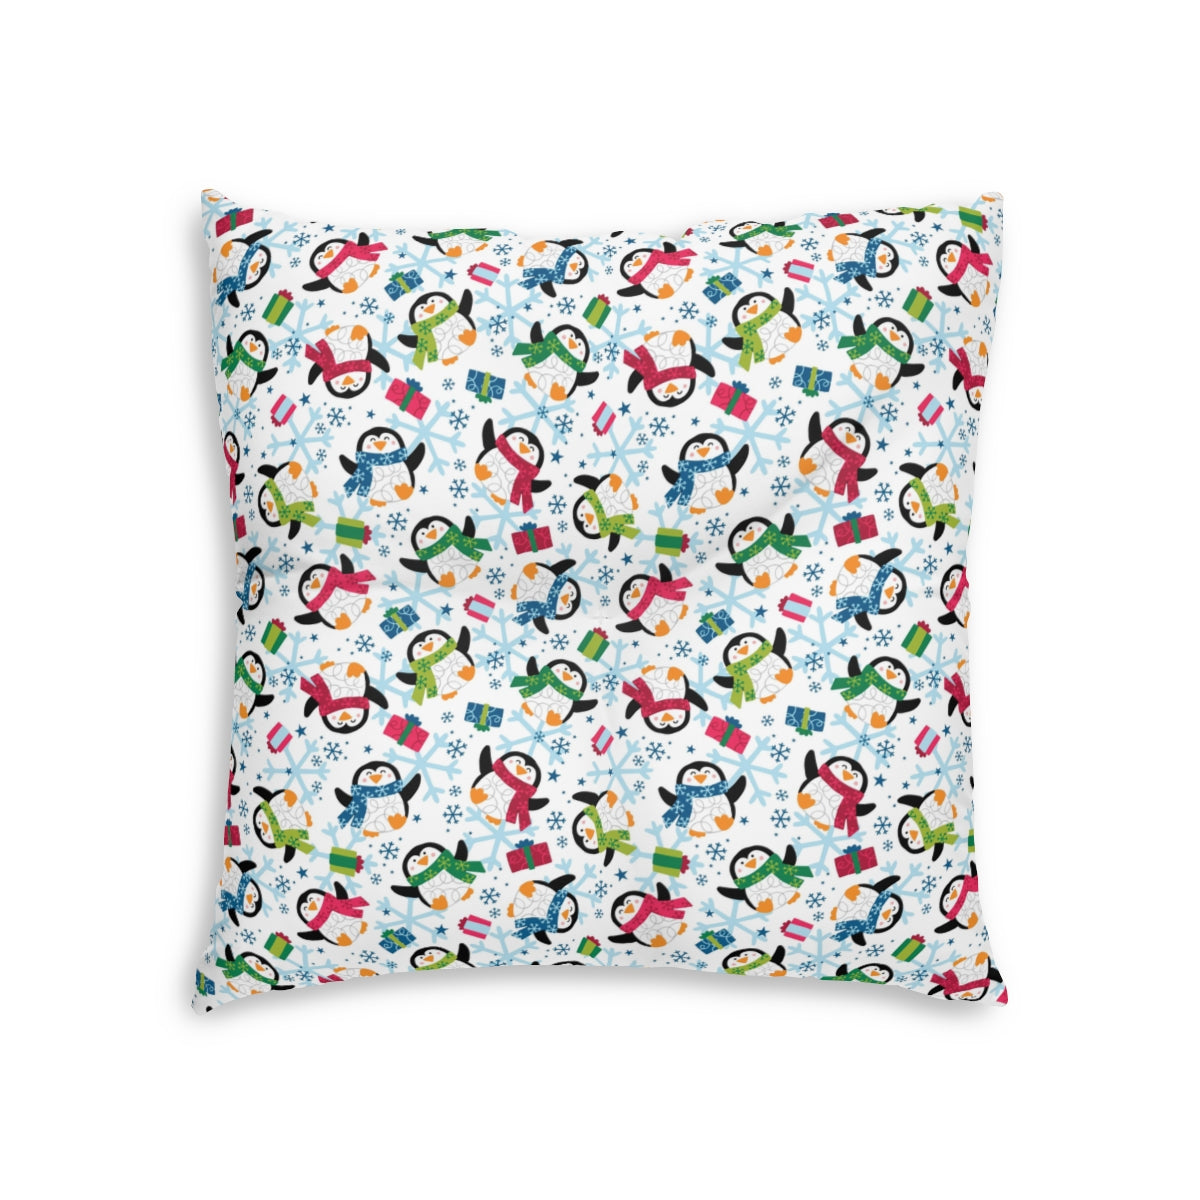 Penguins and Snowflakes Tufted Floor Pillow, Square